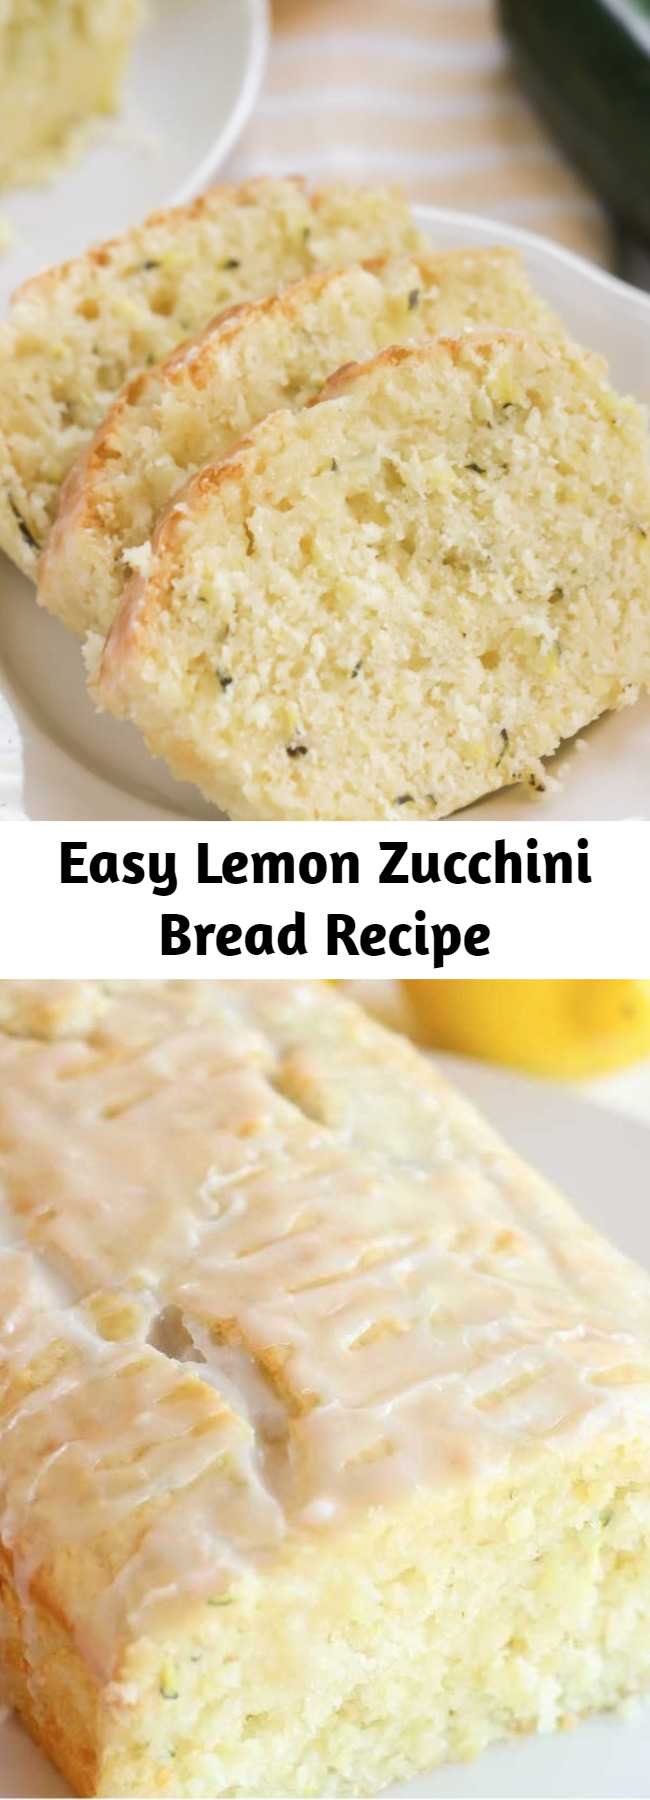 Easy Lemon Zucchini Bread Recipe - Delicious Glazed Lemon Zucchini Bread Recipe that is soft, moist, filled with grated zucchini and lemon juice and topped with a lemony glaze.